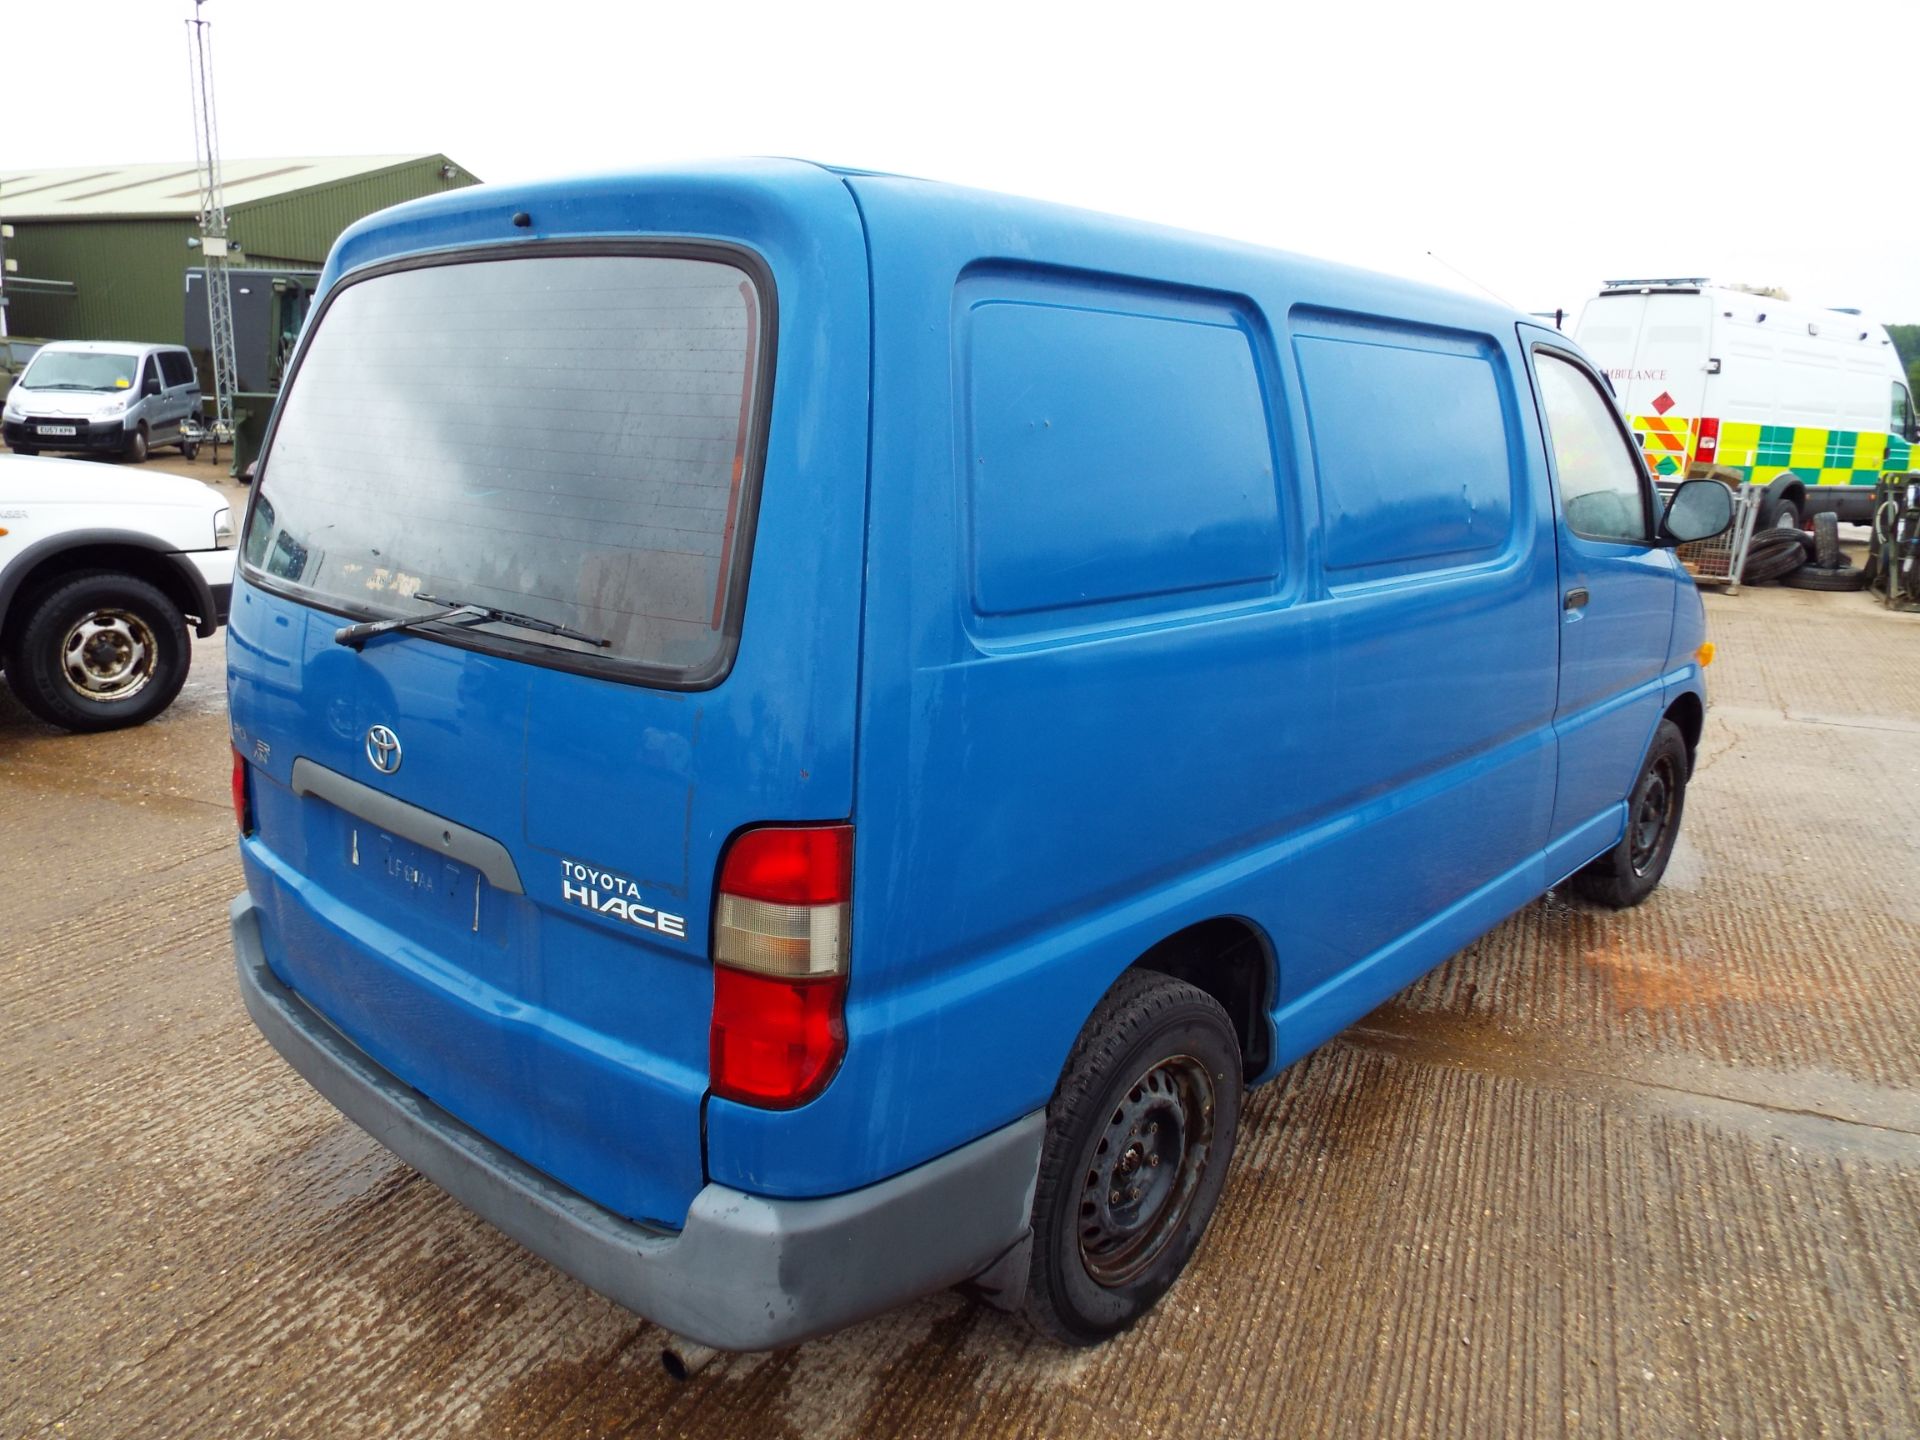 Toyota Hiace 2.4 D - Image 7 of 21